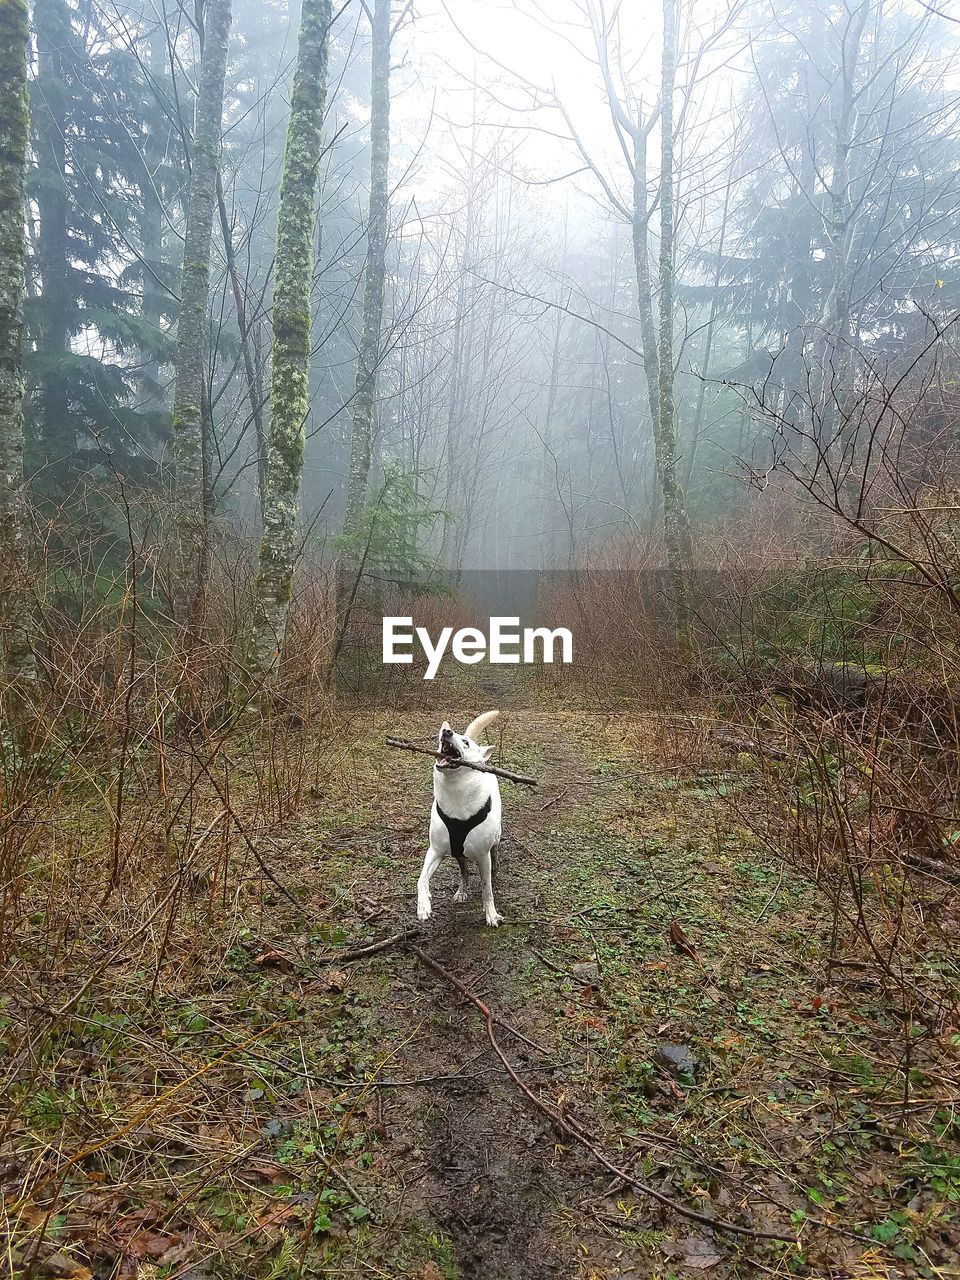 DOG STANDING BY BARE TREE IN FOREST